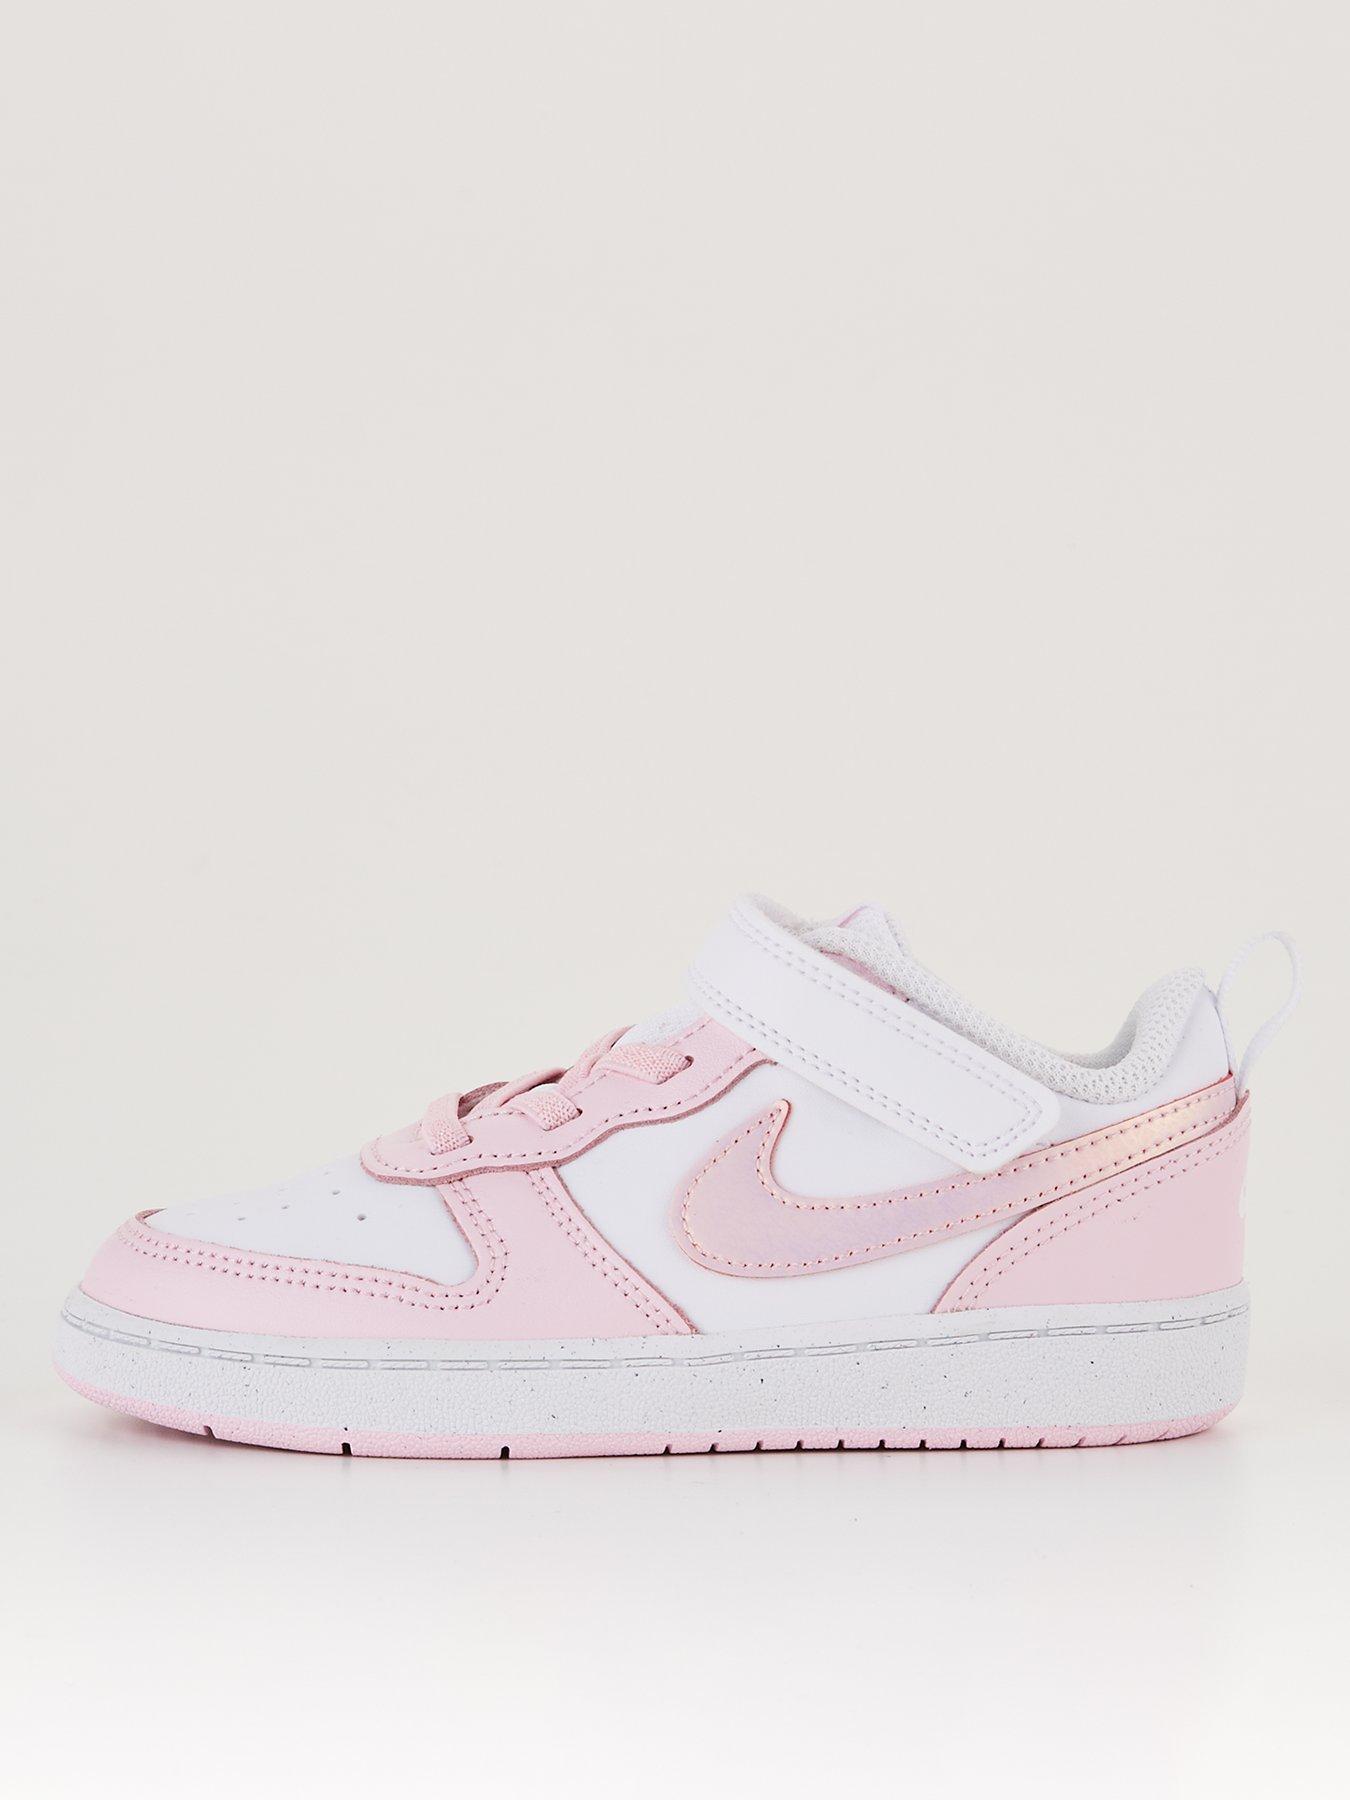 Nike Court Borough Low Infants Girls Trainers - White/Pink | very.co.uk